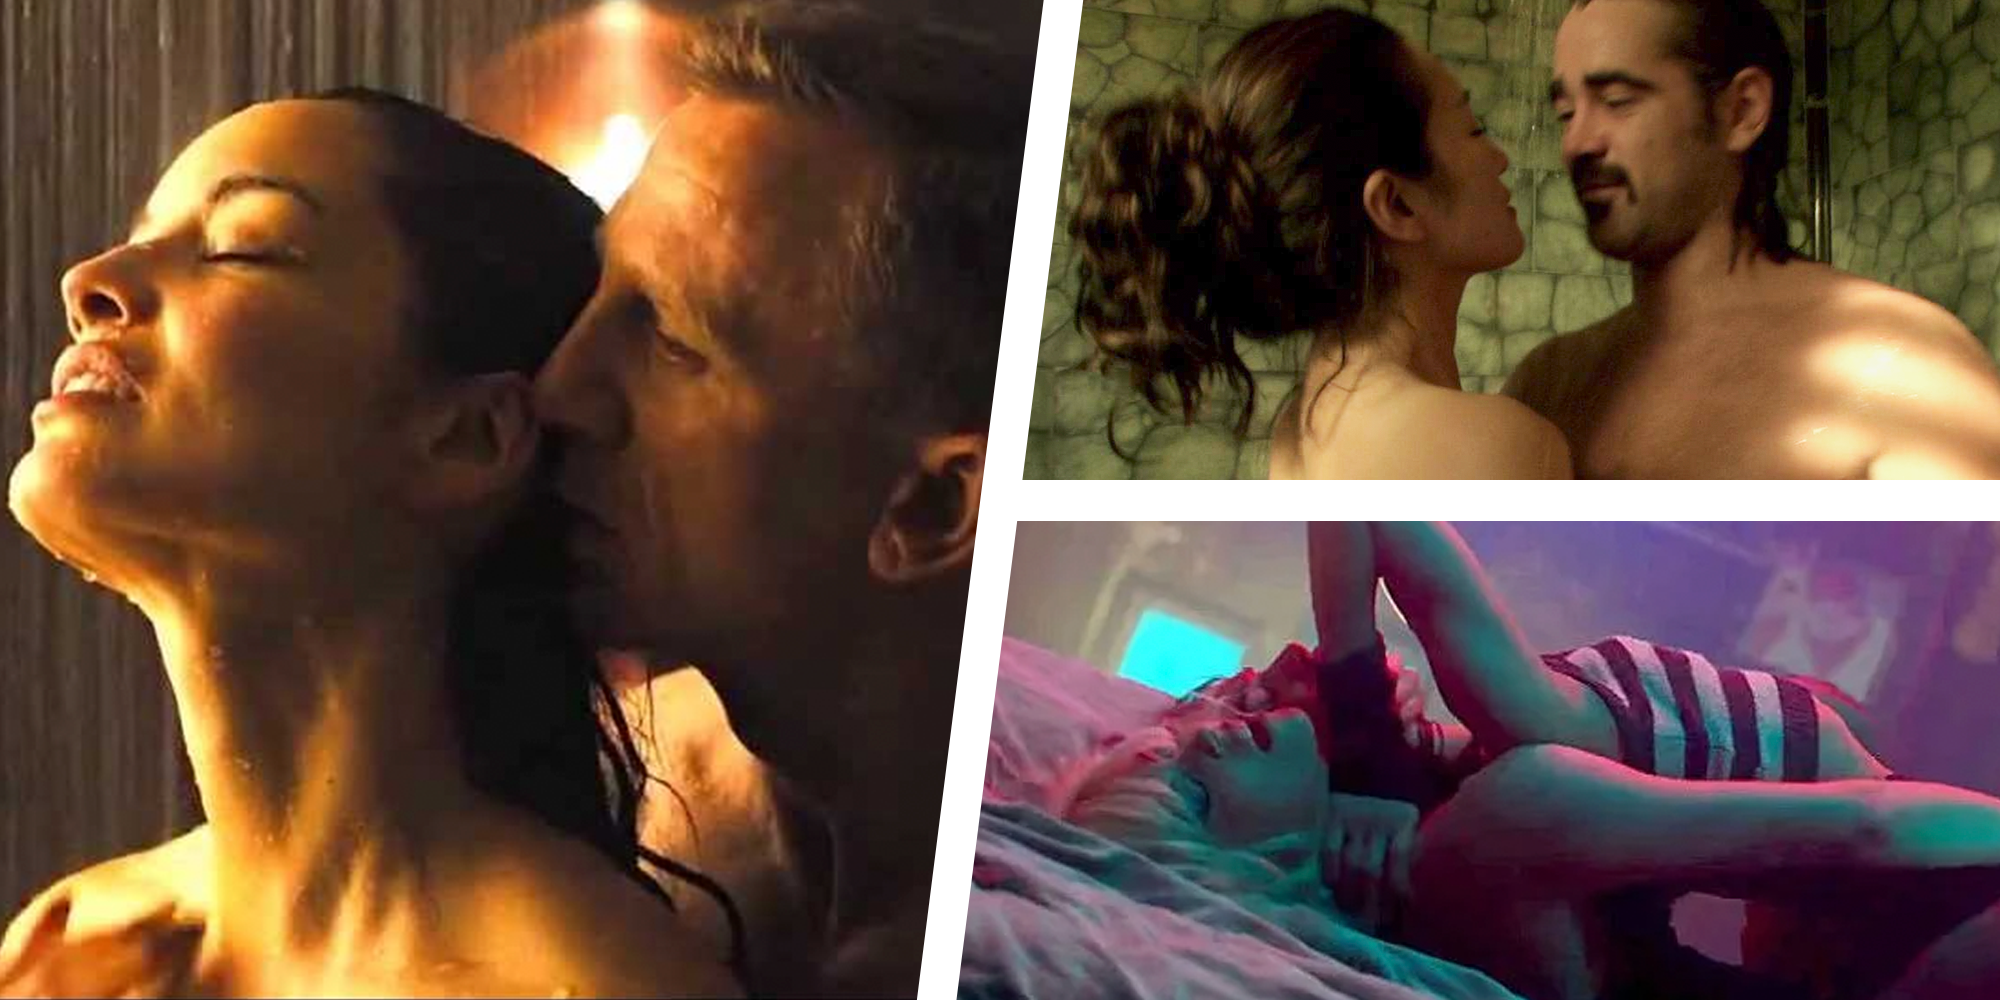 Action comides movies with sex scenes